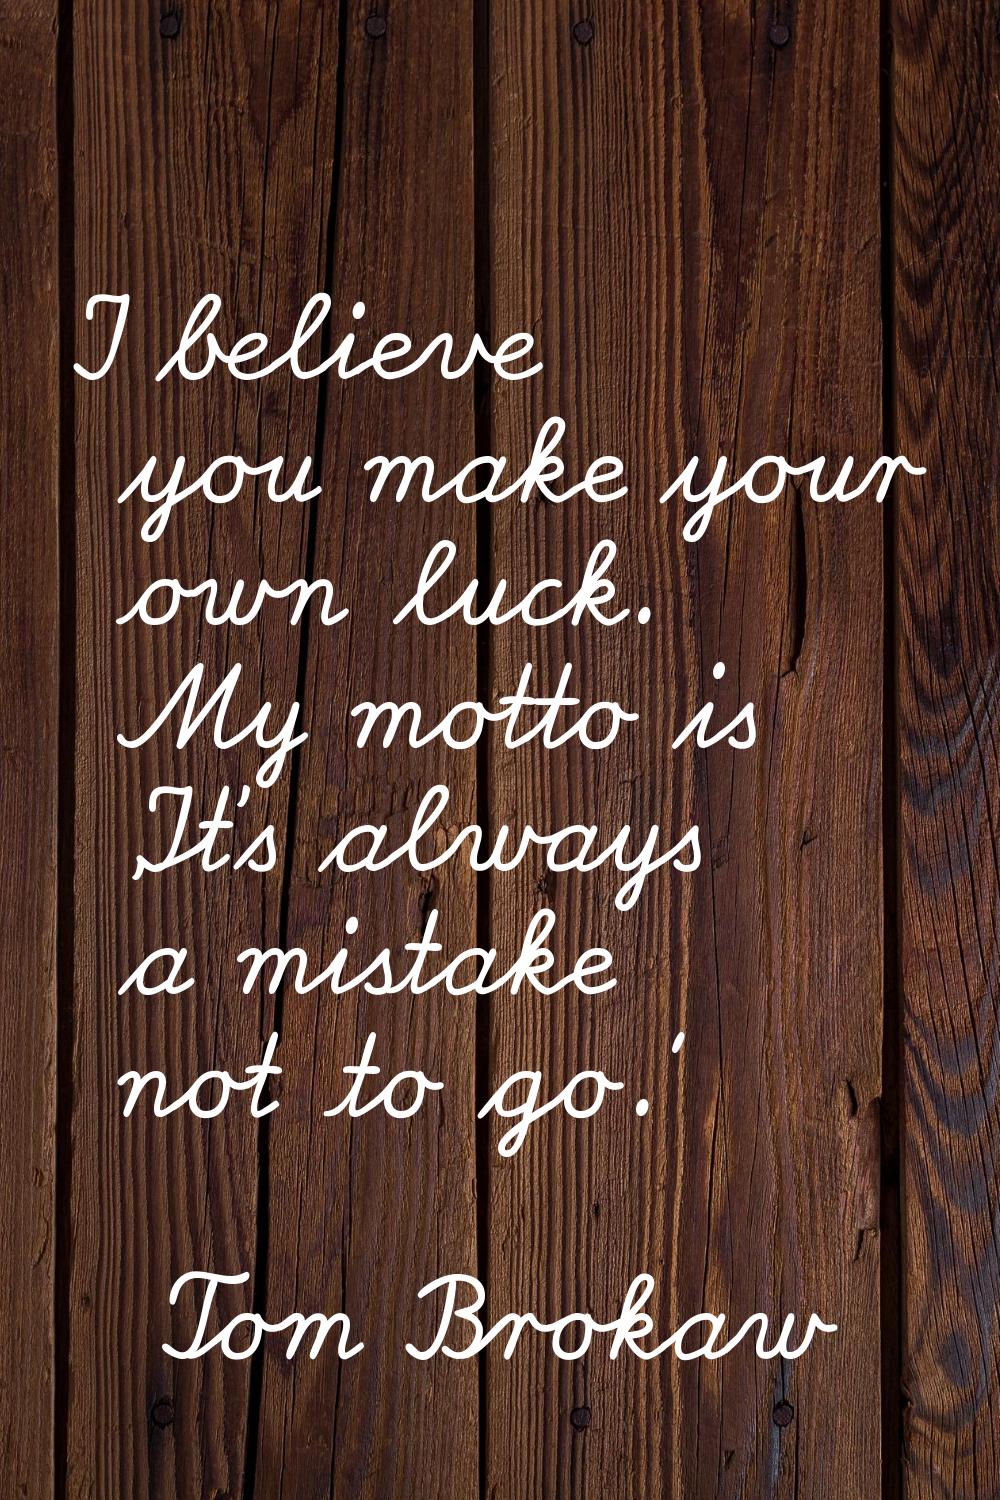 I believe you make your own luck. My motto is 'It's always a mistake not to go.'